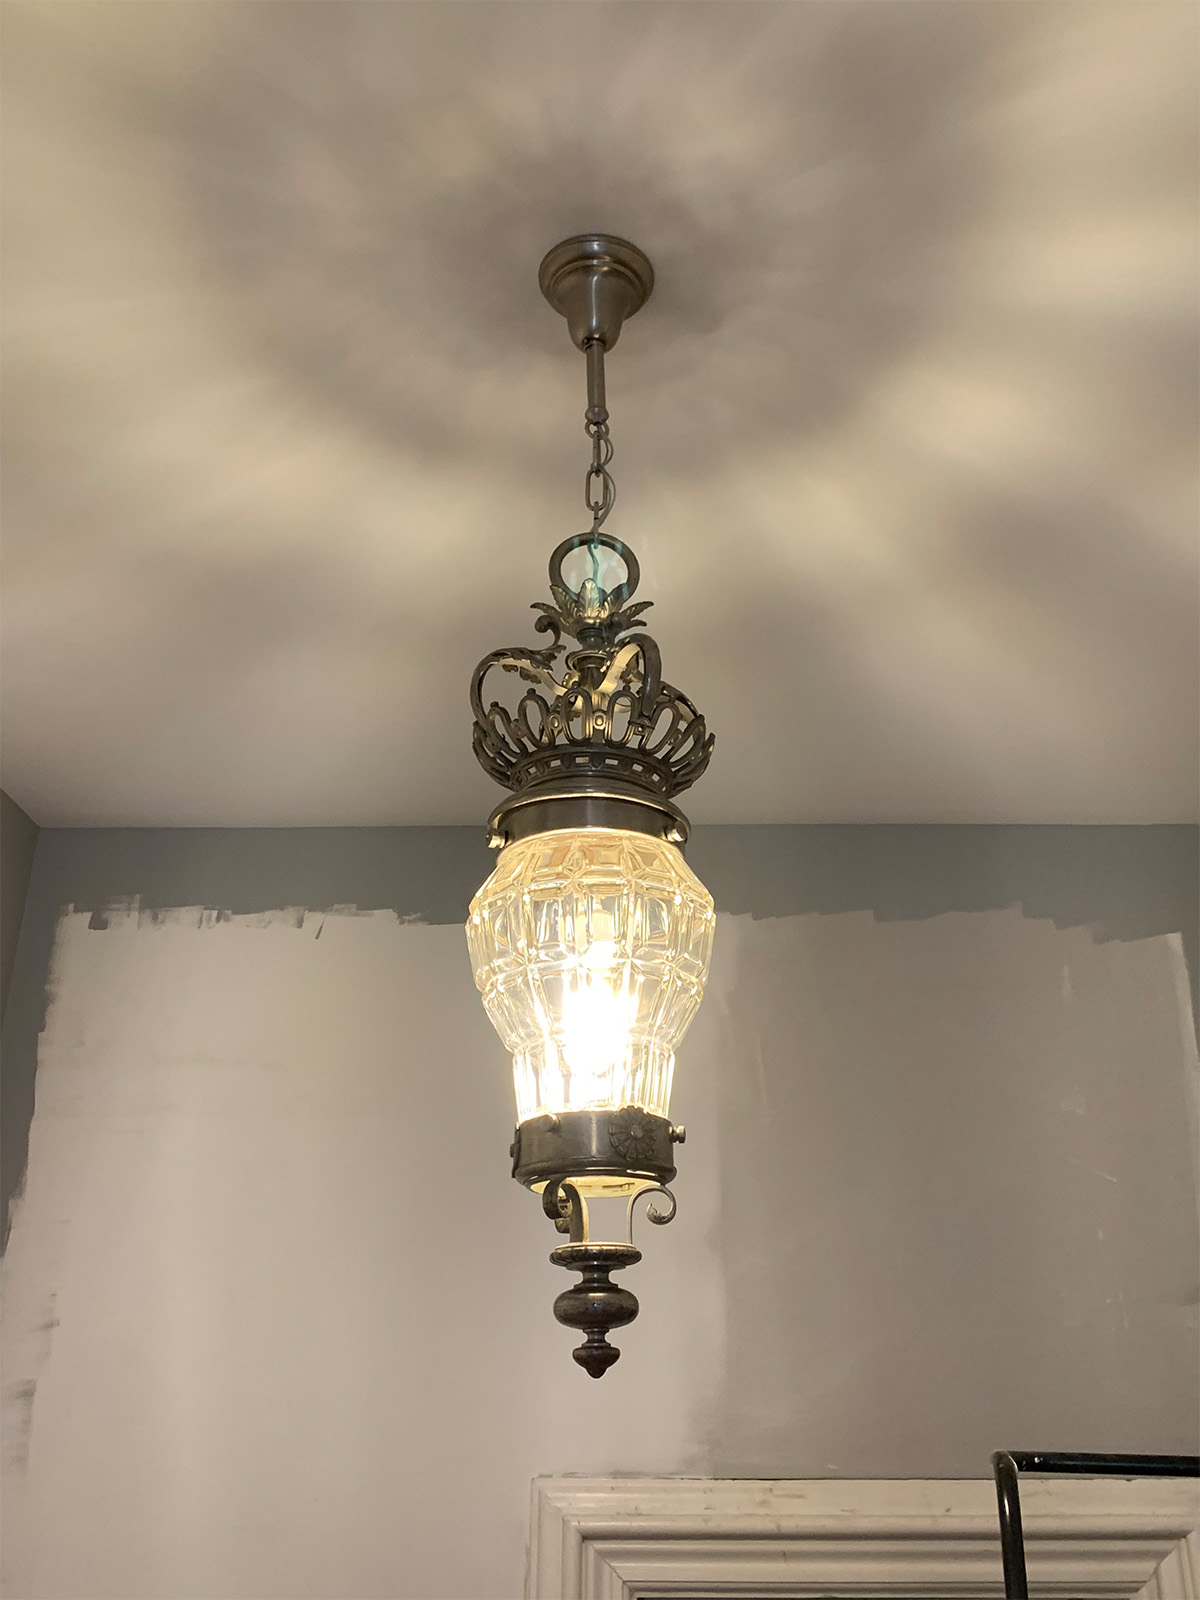 Restored Ceiling Lamp Inside Victorian Home